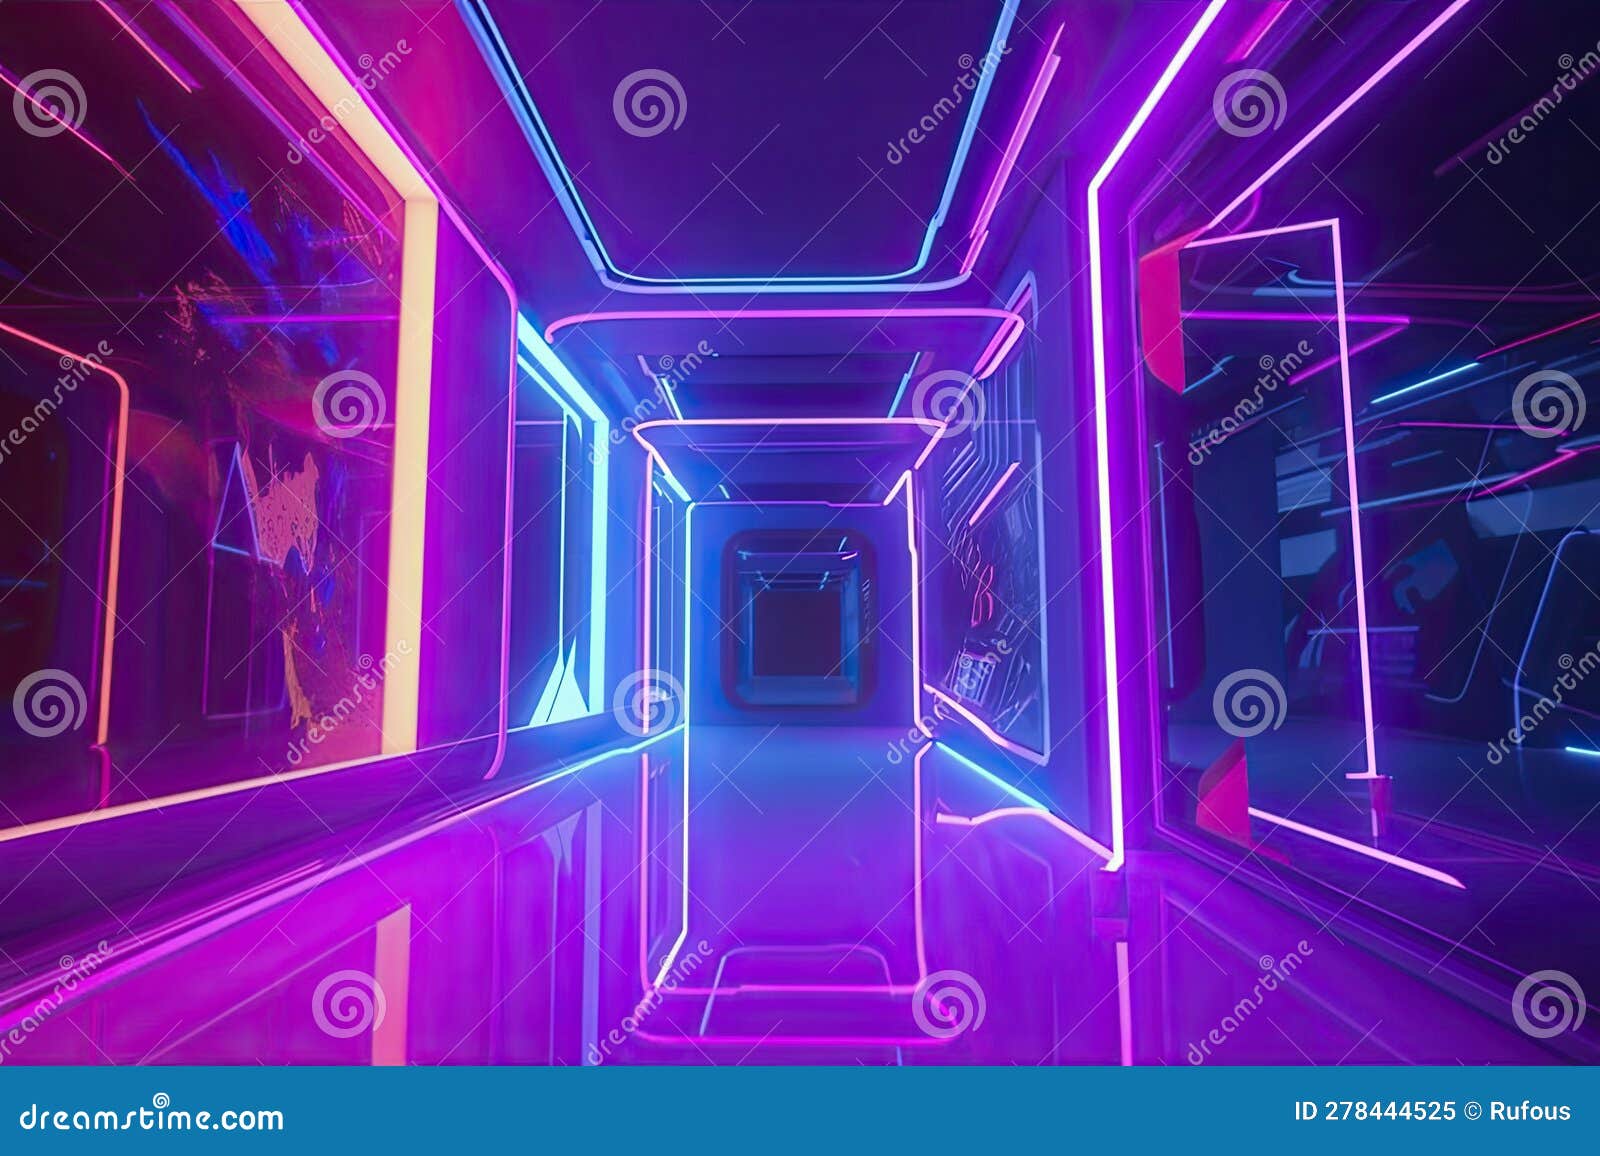 Entrance To Metaverse Virtual World with Cyberpunk Neon Ligthing Color ...